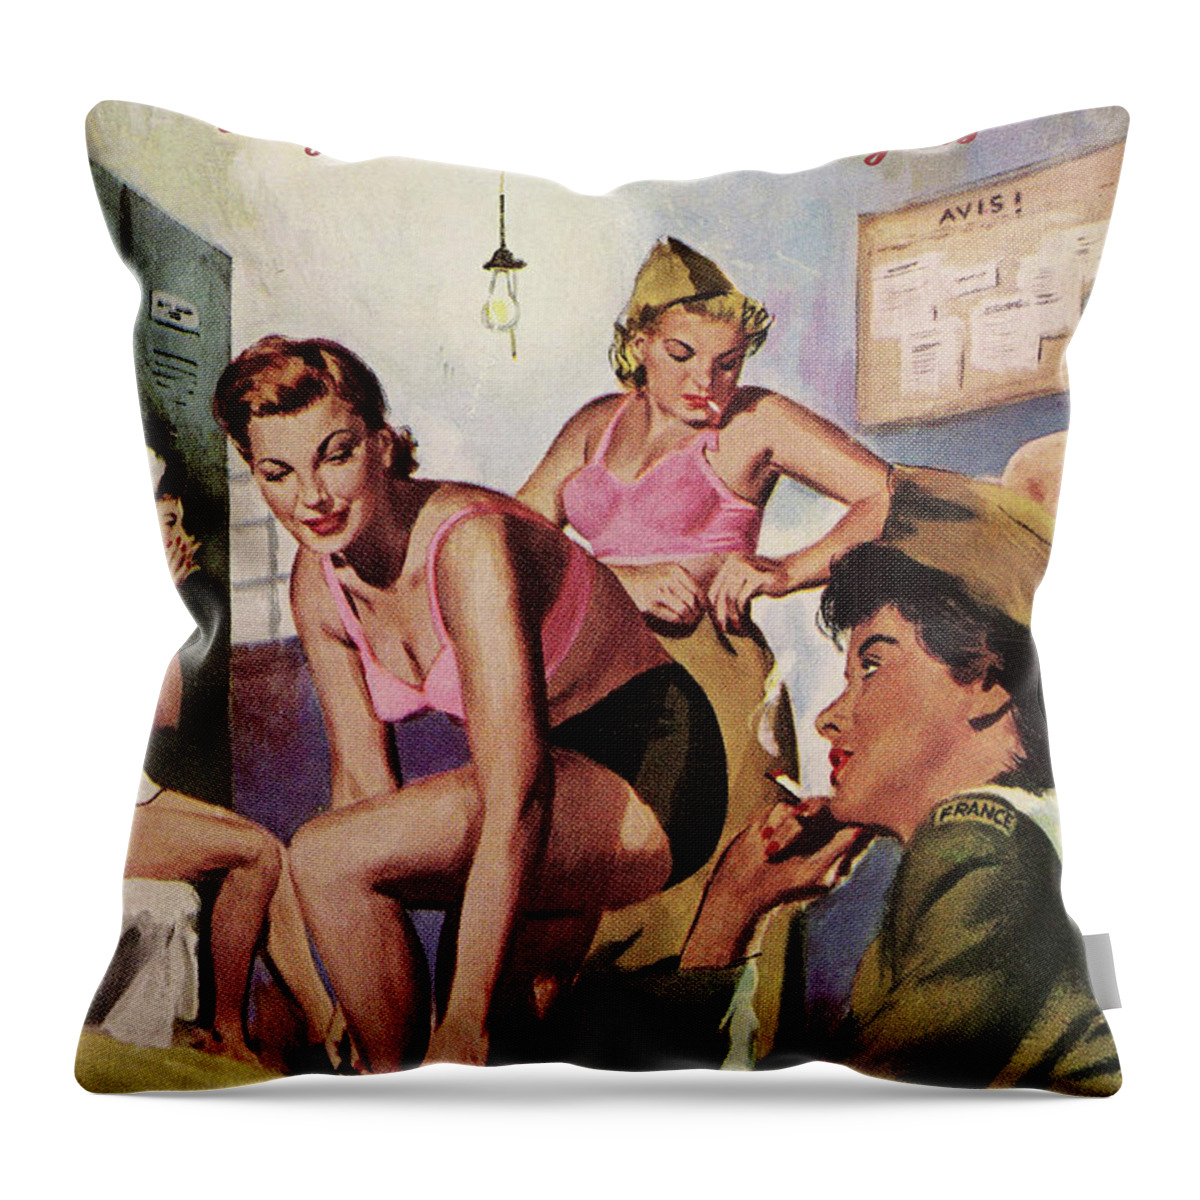 Military Throw Pillow featuring the digital art Women Love in the Army by Long Shot